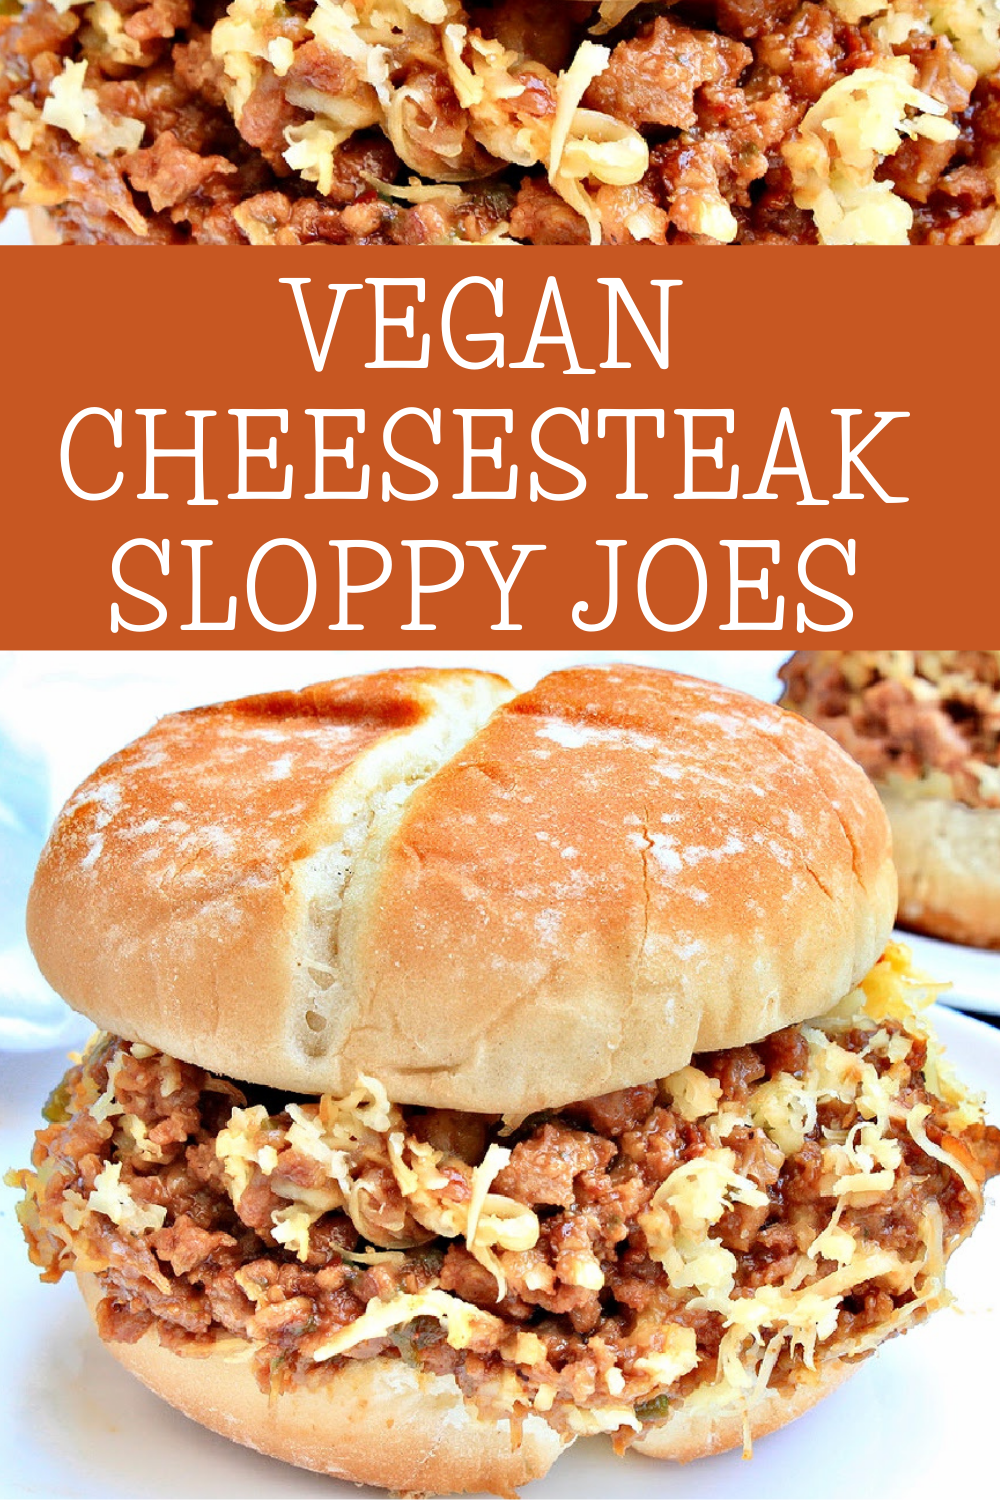 Cheesesteak Sloppy Joes ~ A crowd-pleasing, plant-based version of the 'poor man's cheesesteak!' Easy, budget-friendly weeknight meal in 20 minutes or less! via @thiswifecooks